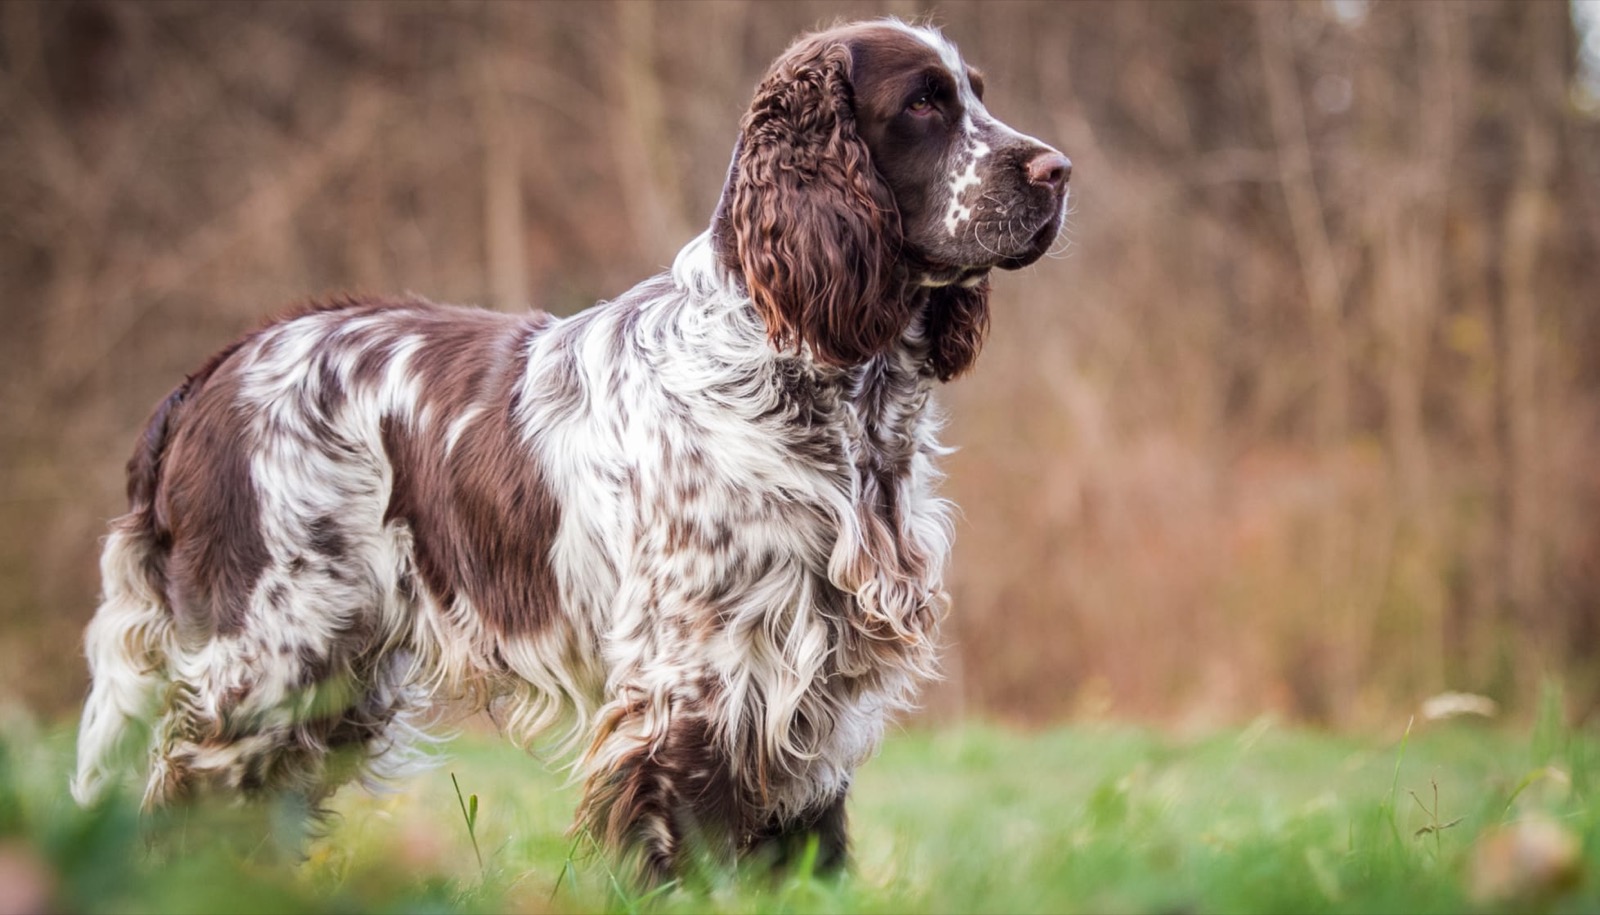 This 🐕 Dog Breeds Quiz May Be a Liiiittle Challenging, But Let’s See If You Can Score 15/20 English Springer Spaniel